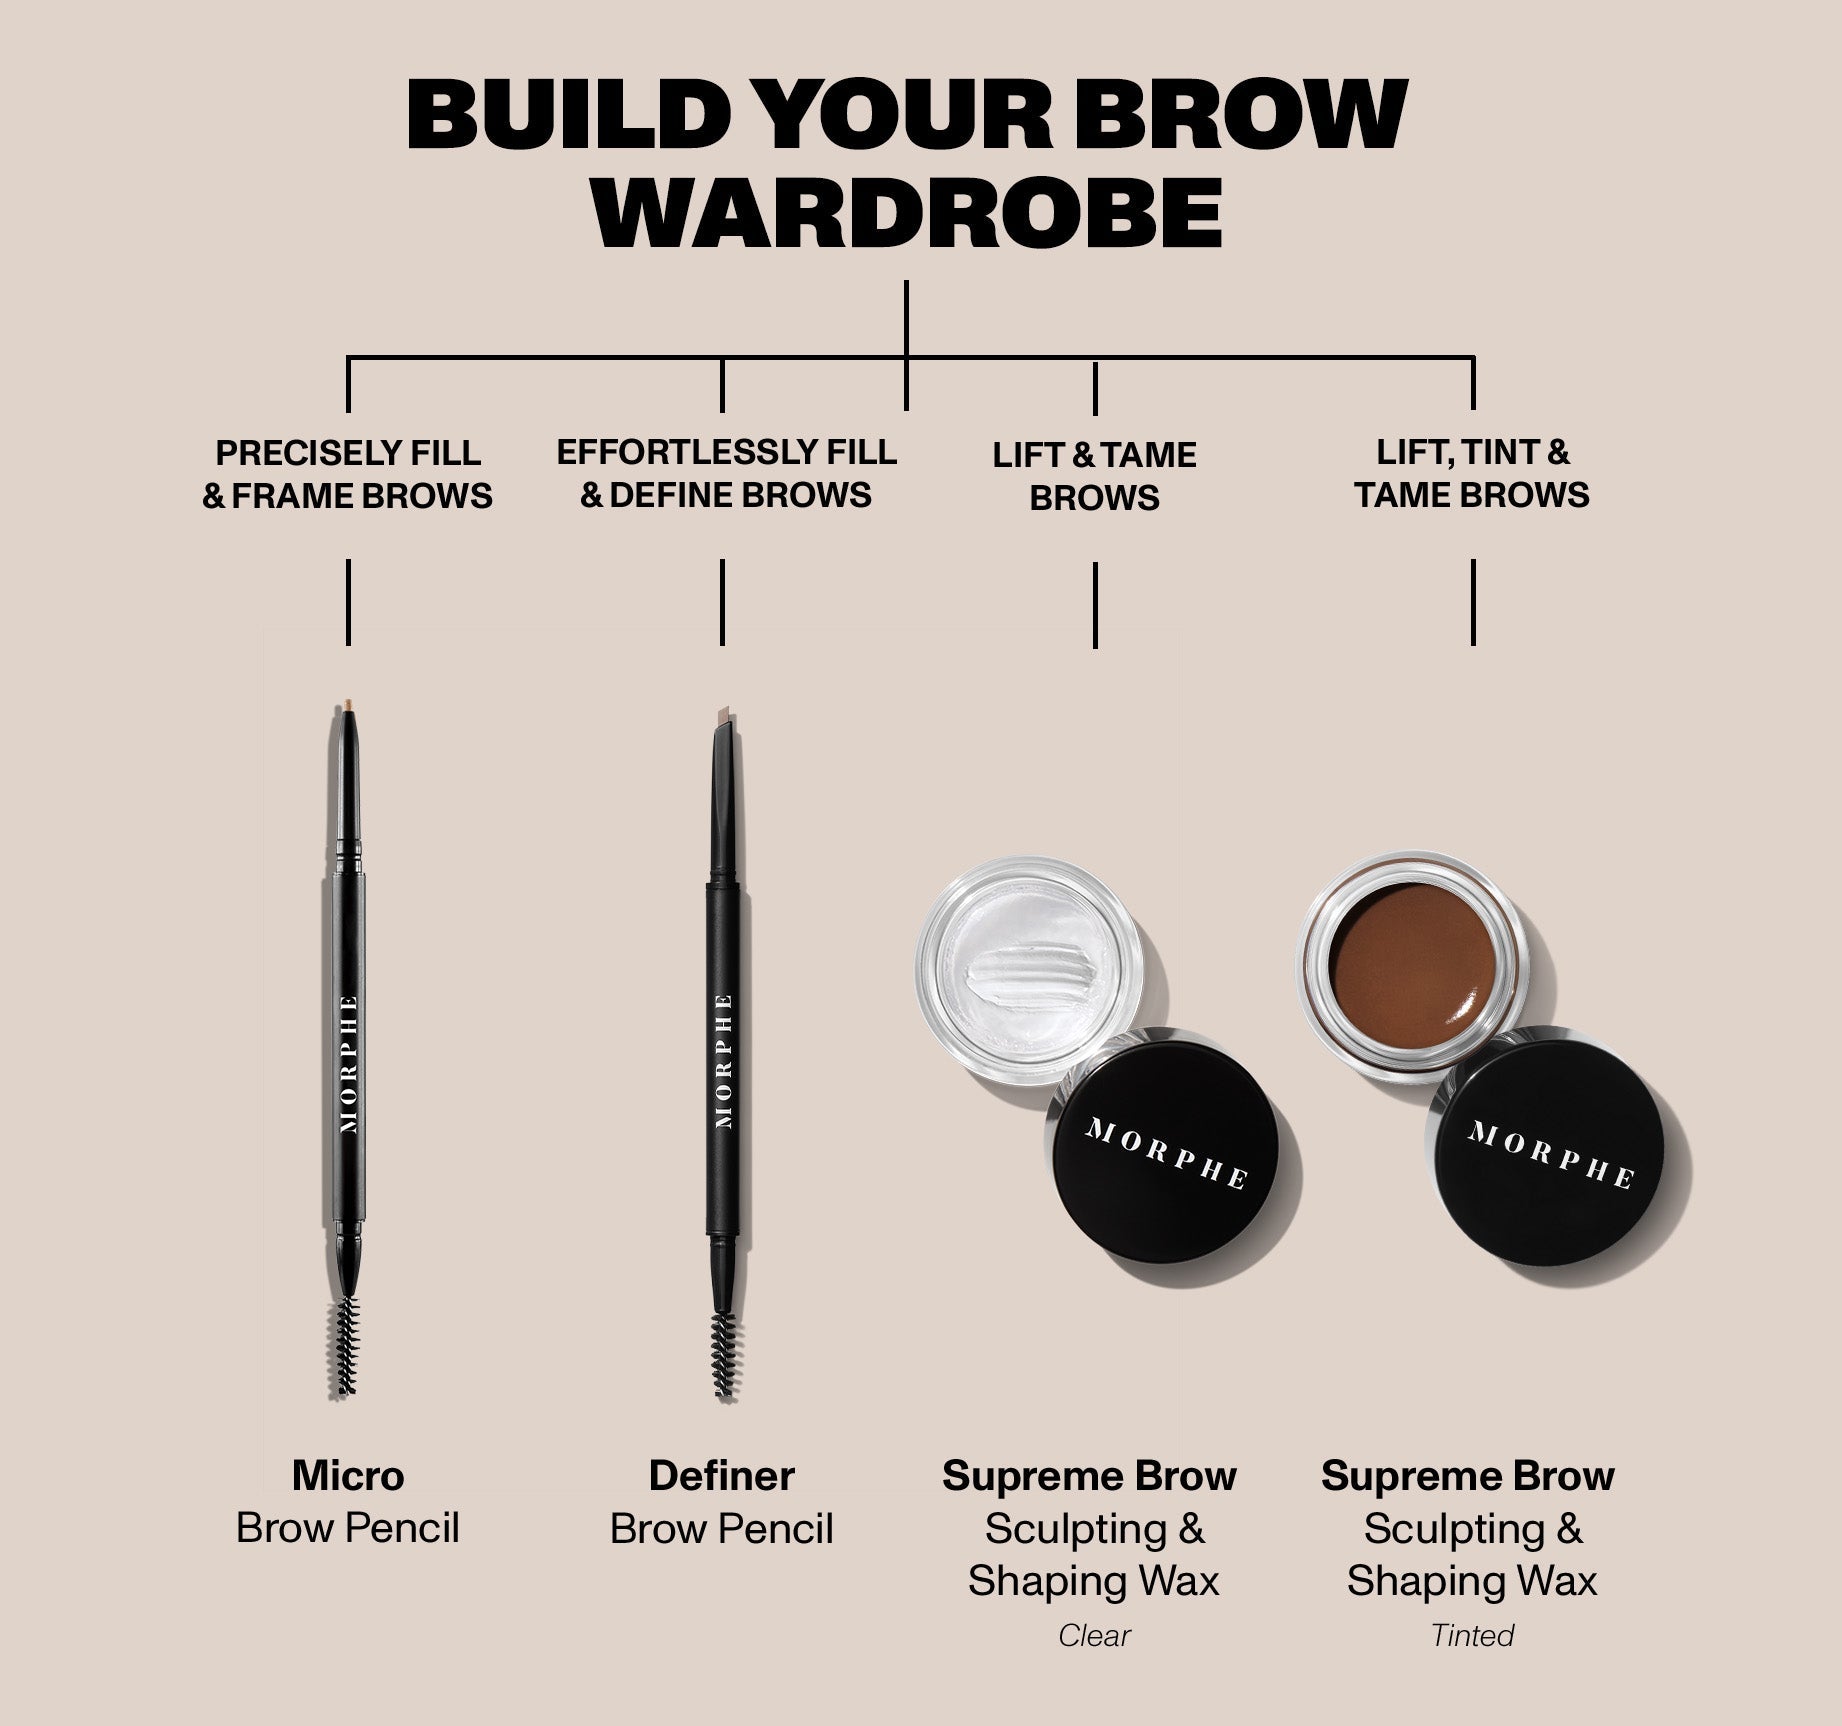 Supreme Brow Sculpting And Shaping Wax - Java - Image 10